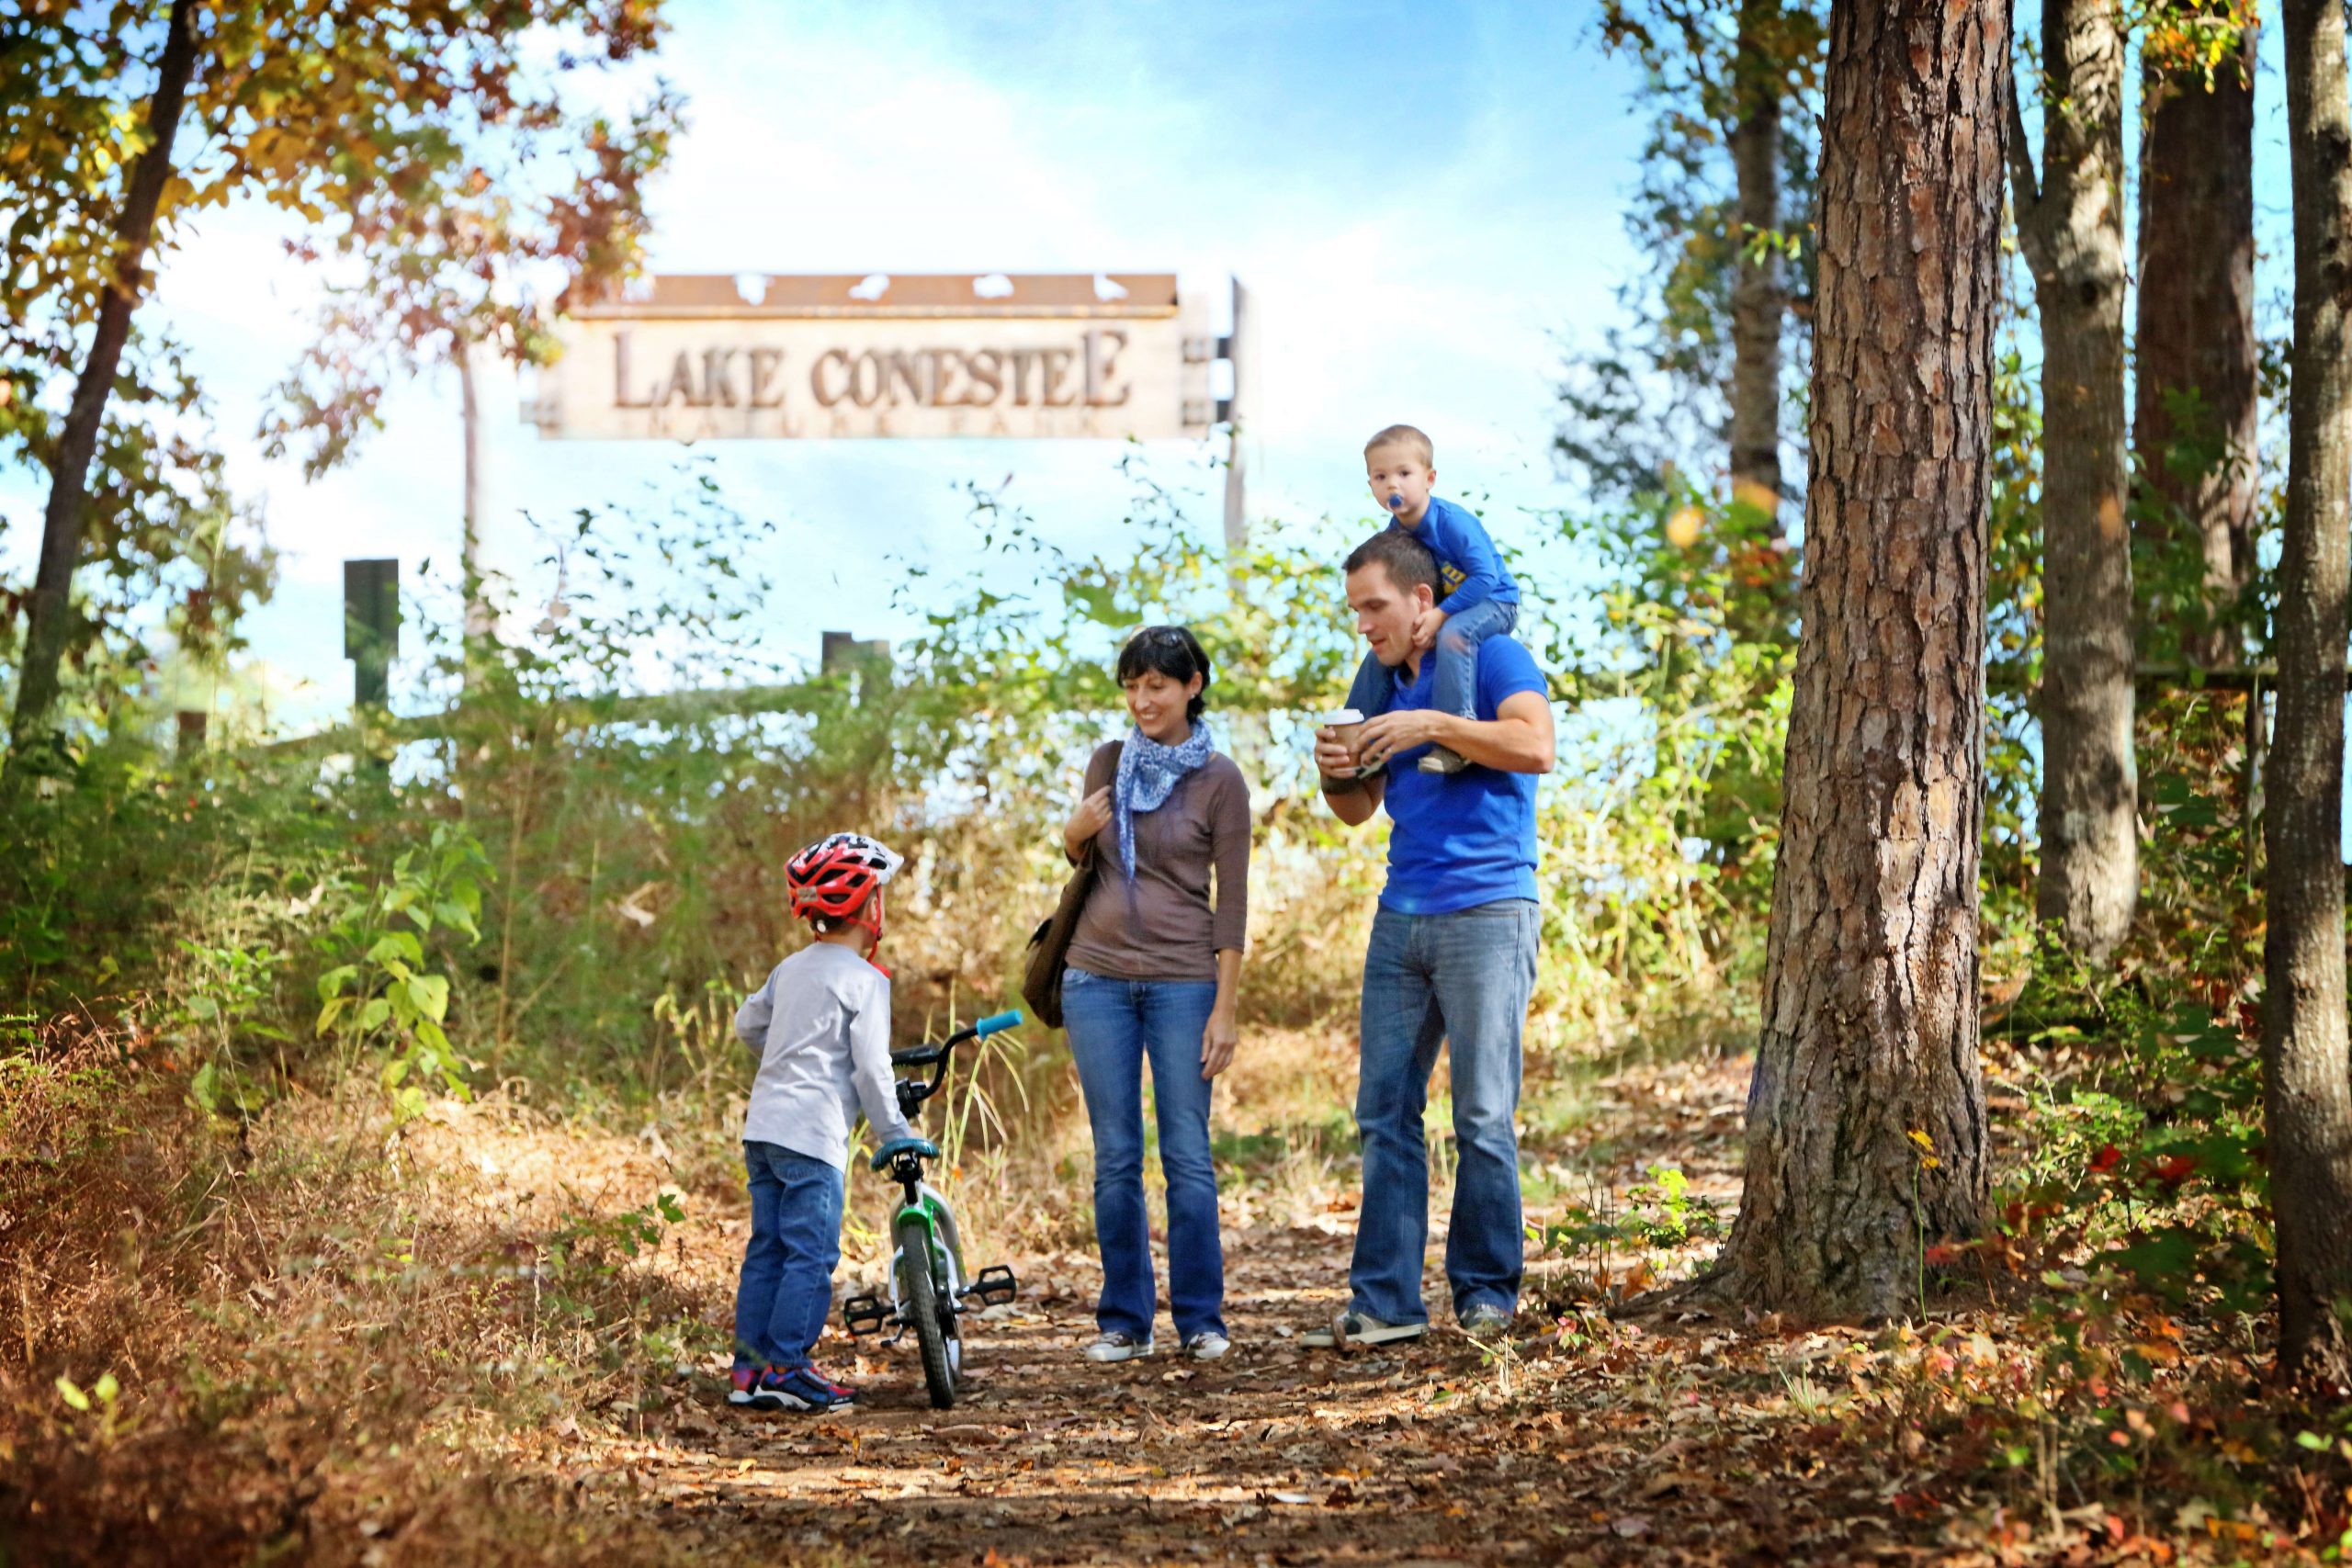 Lake Conestee Nature Park consists of approximately 400 acres of natural habitat on the Reedy River, and it is located 6 miles south of downtown Greenville.